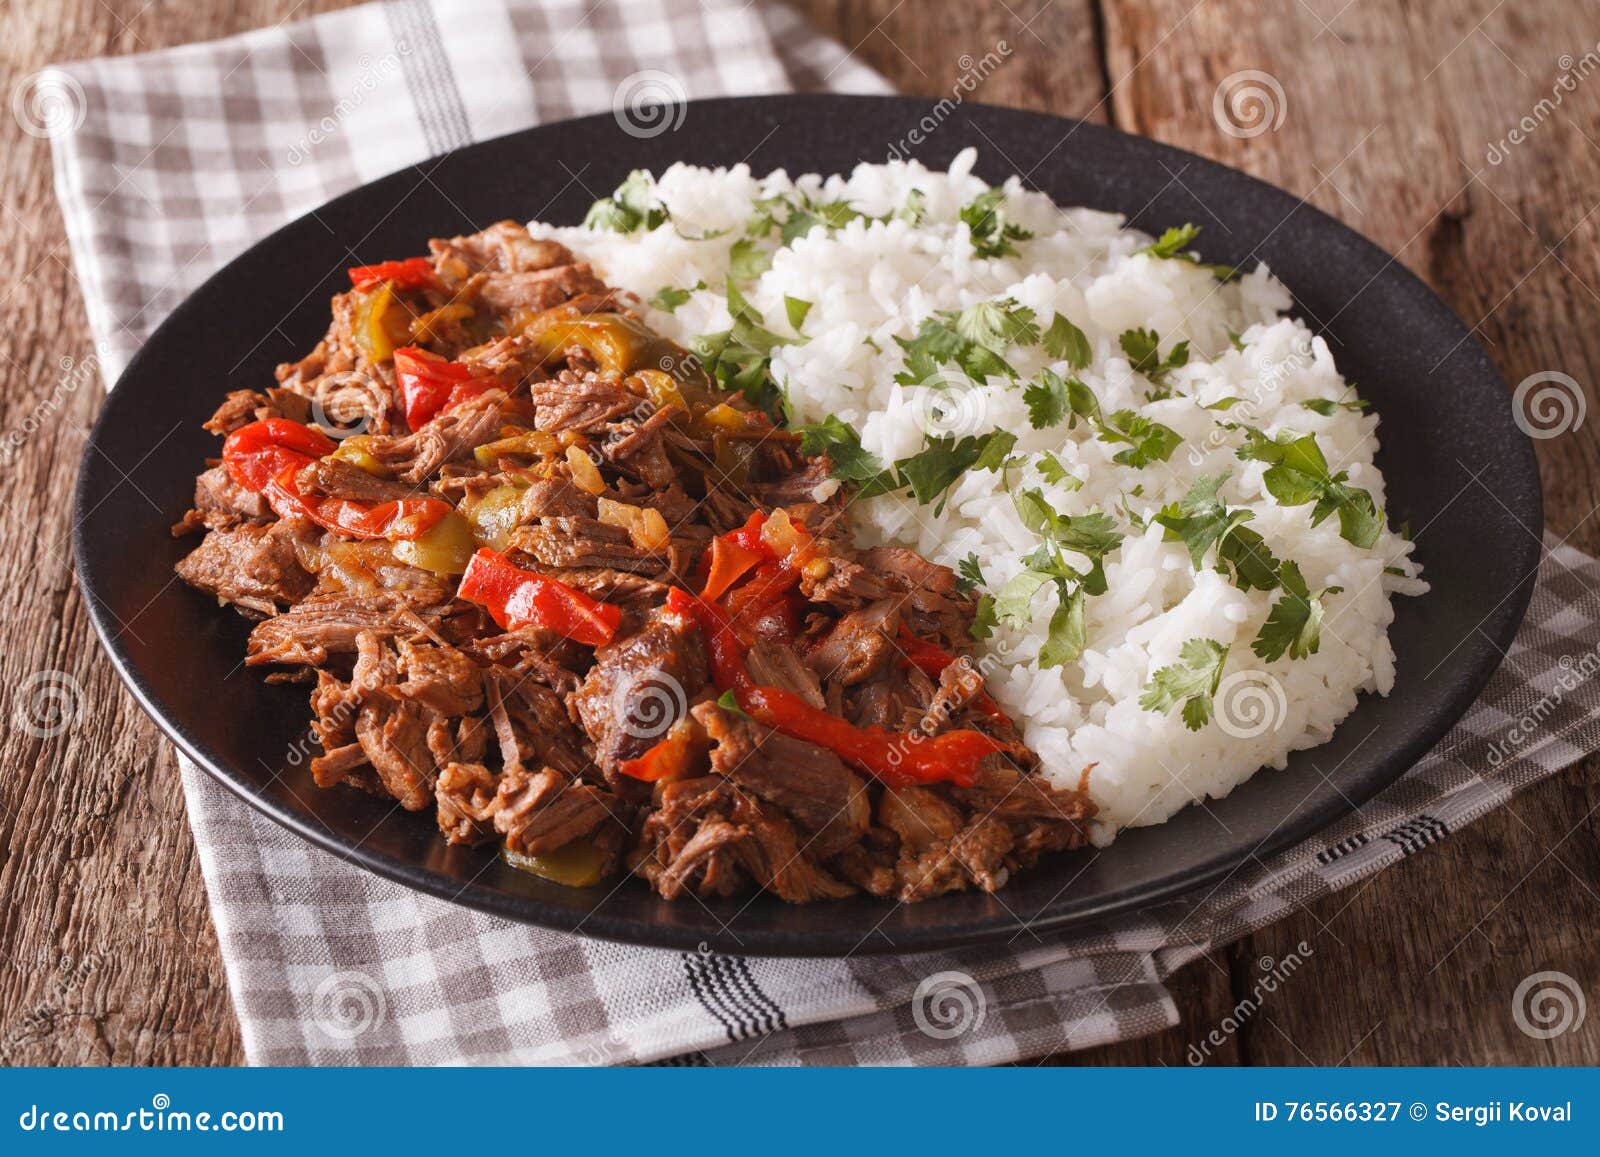 mexican food ropa vieja: beef stew in tomato sauce with vegetabl